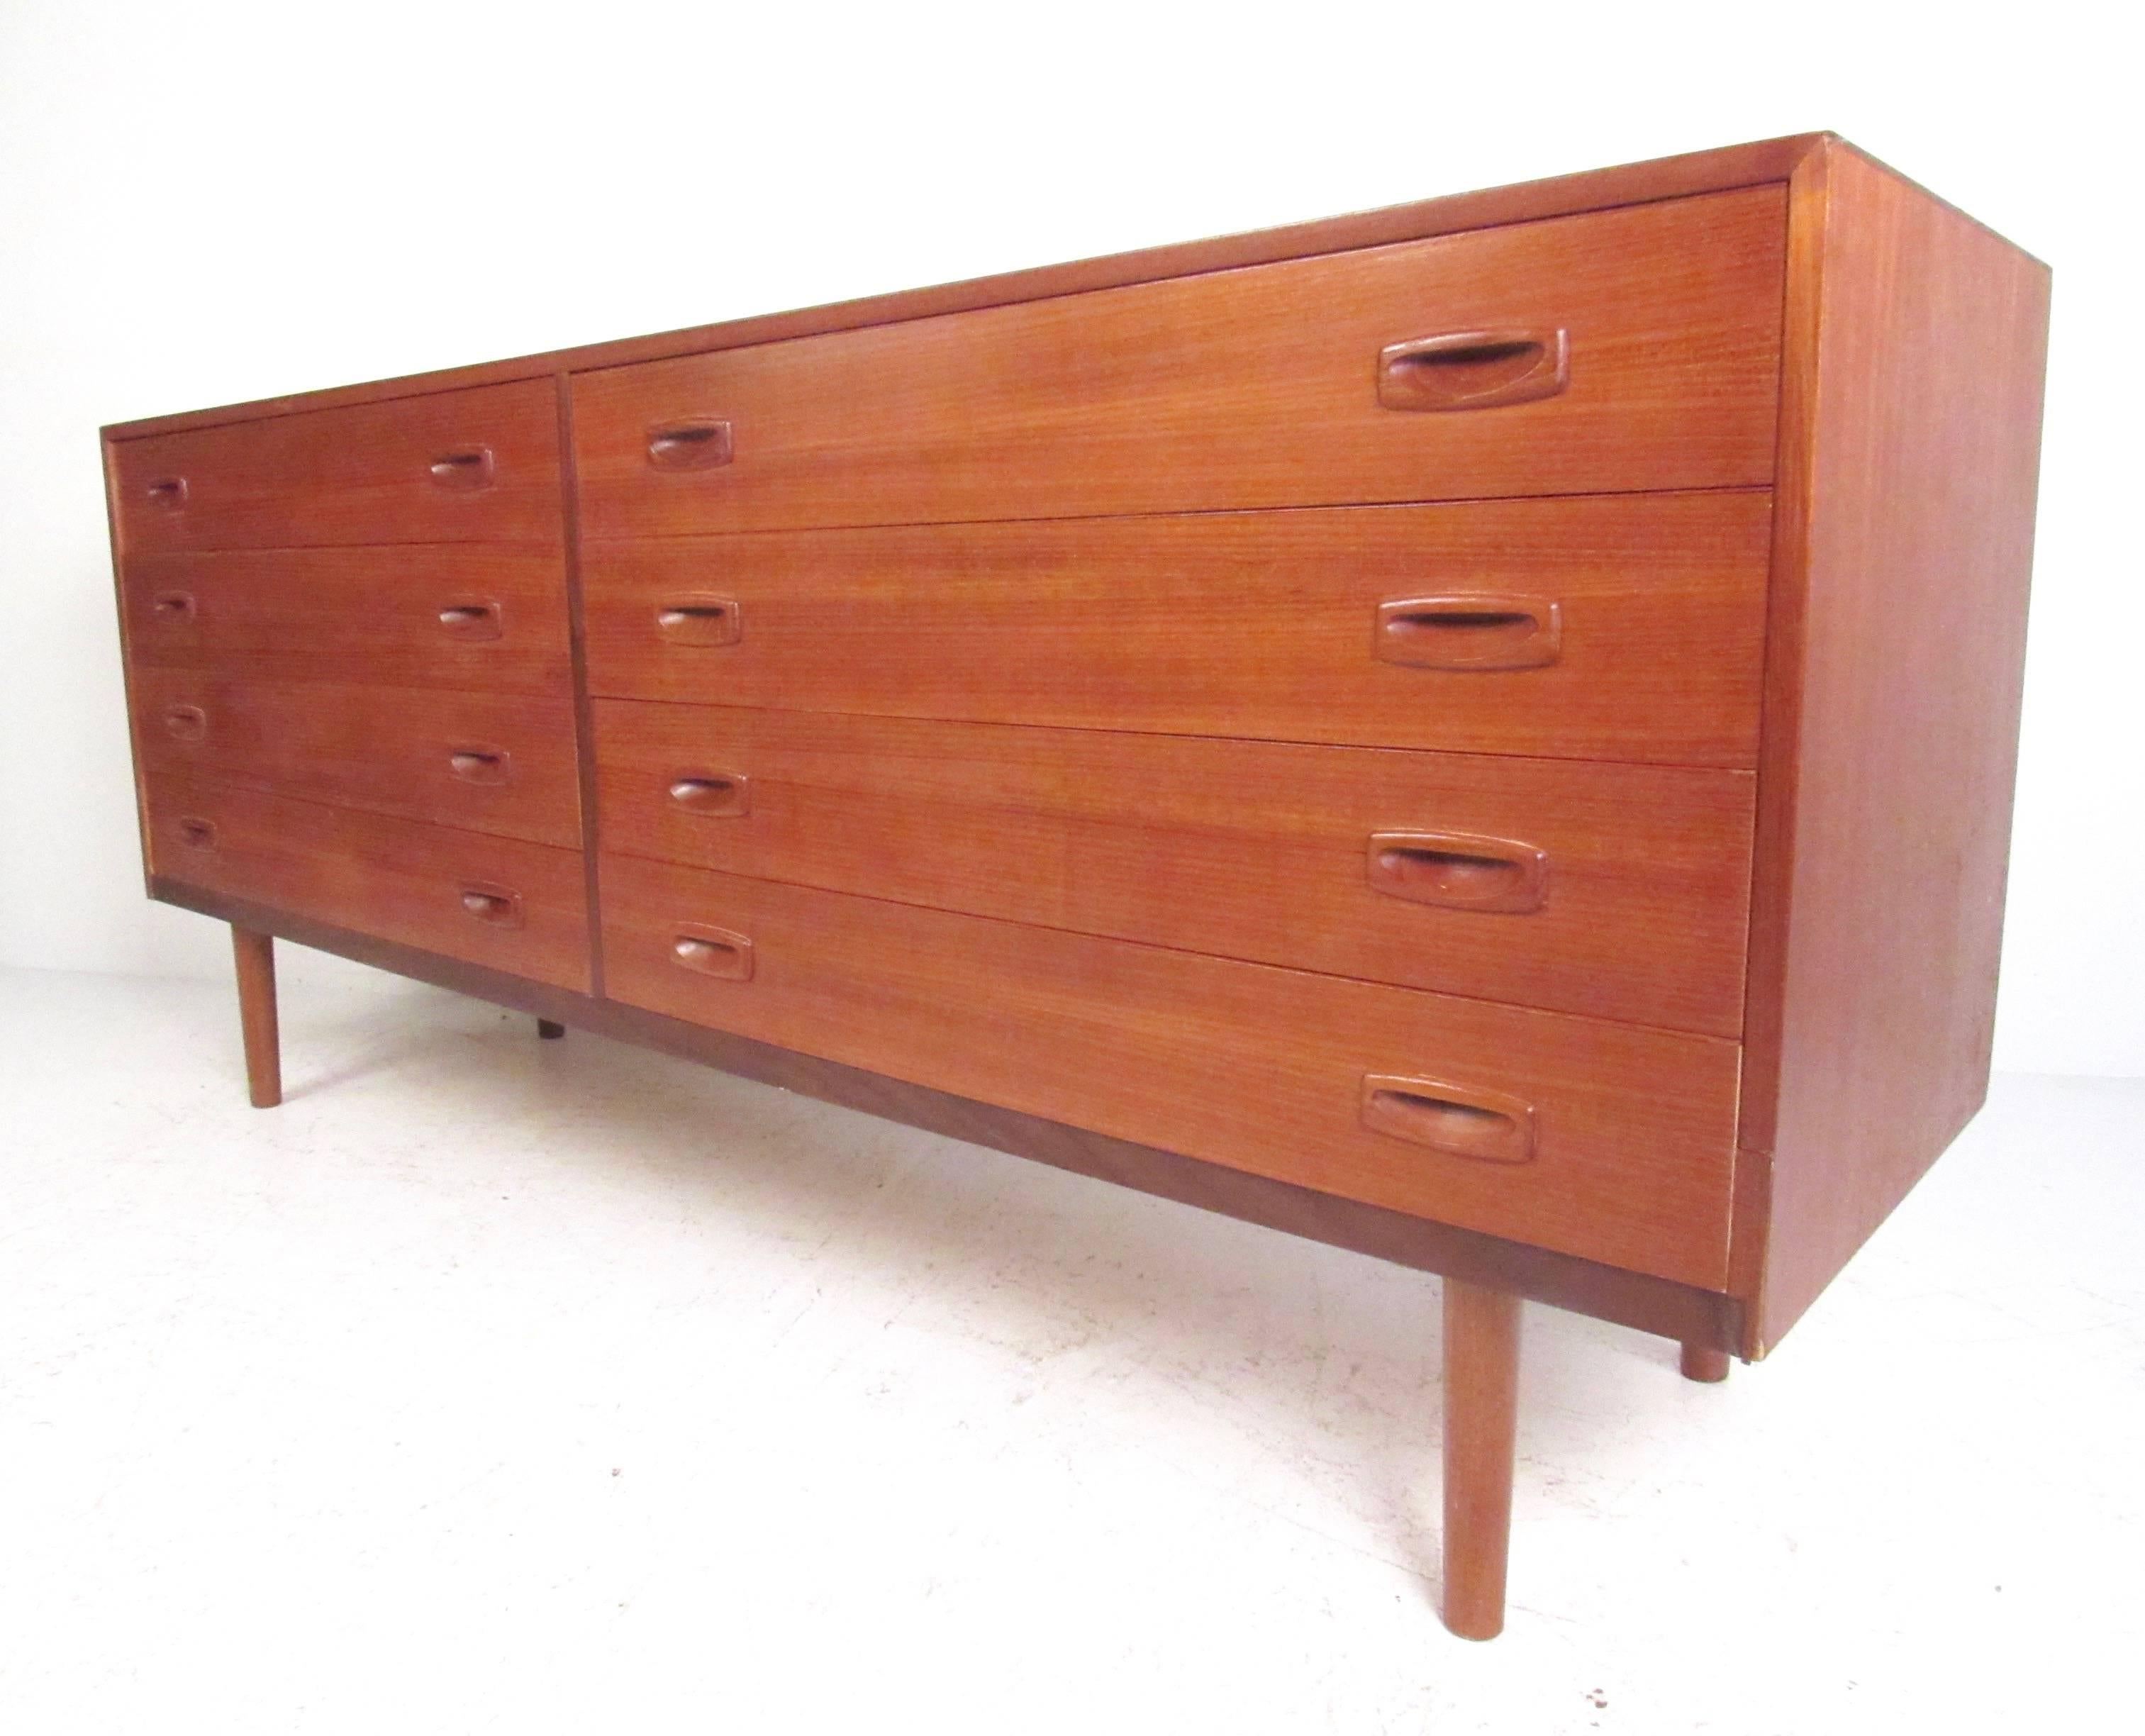 This well crafted Danish modern low bedroom dresser with carved teak drawers, banded teak front, and spacious dovetailed drawers. Please confirm item location (NY or NJ).